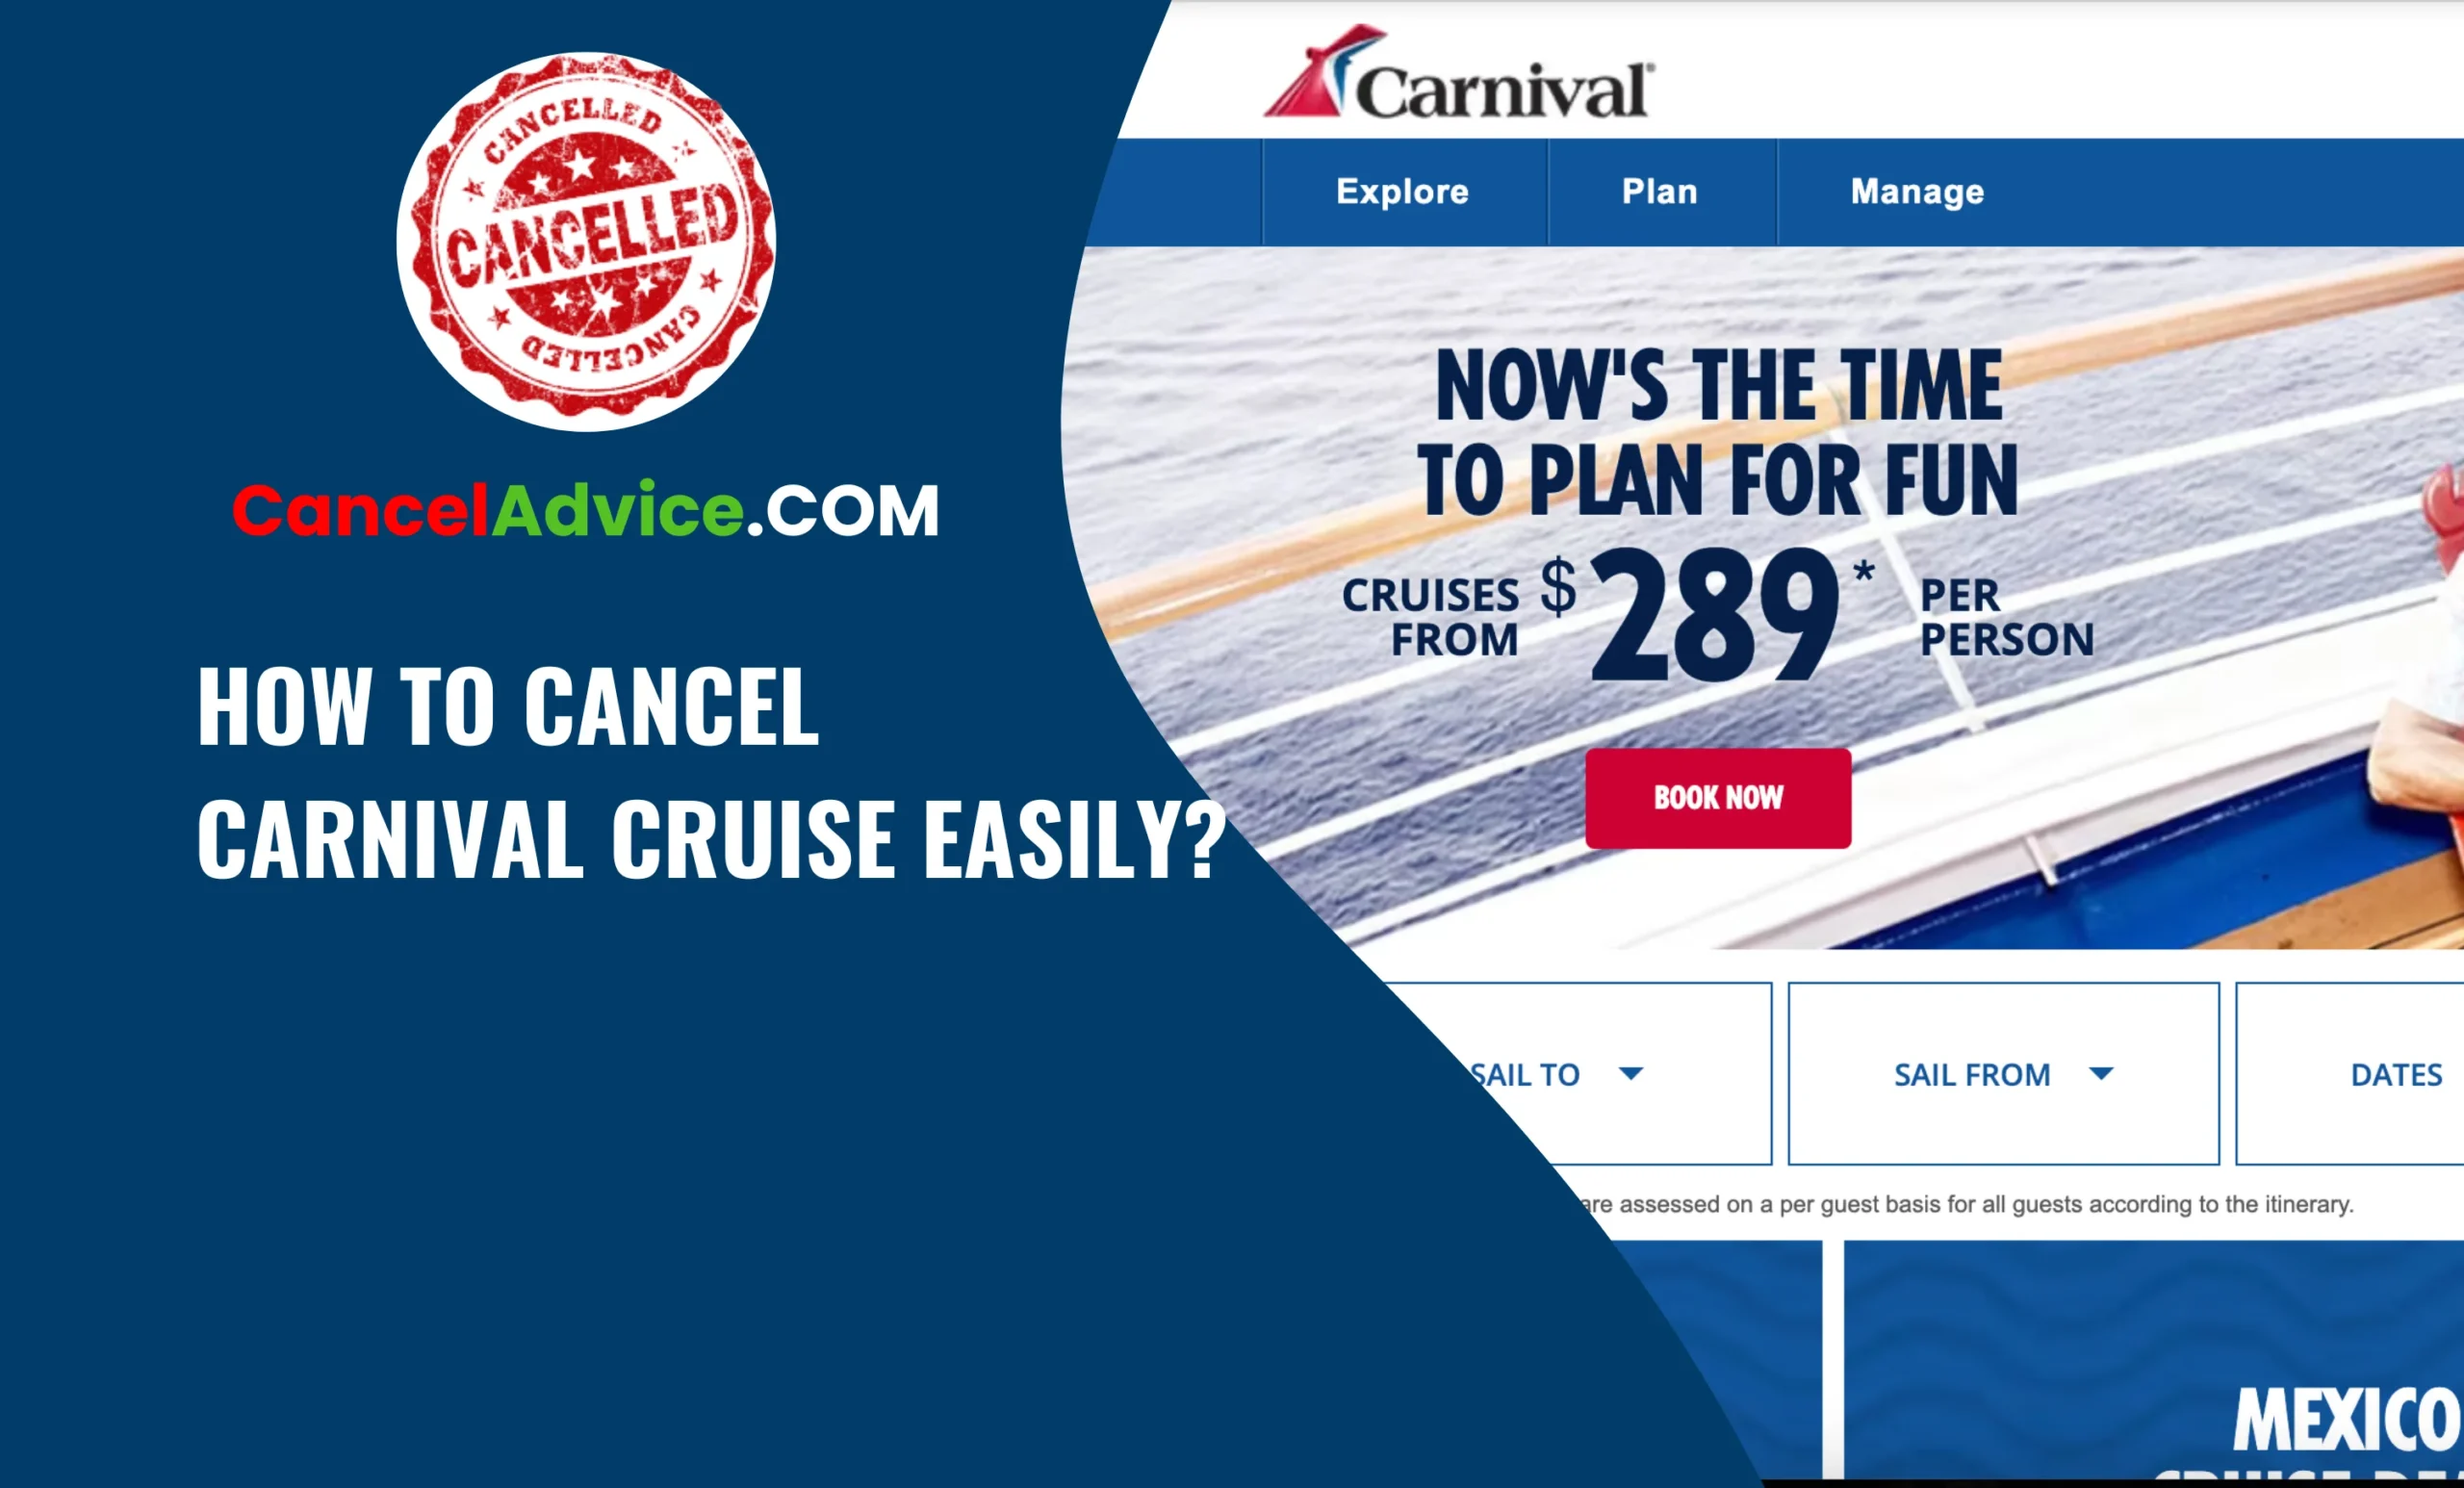 How to Cancel Carnival Cruise Easily